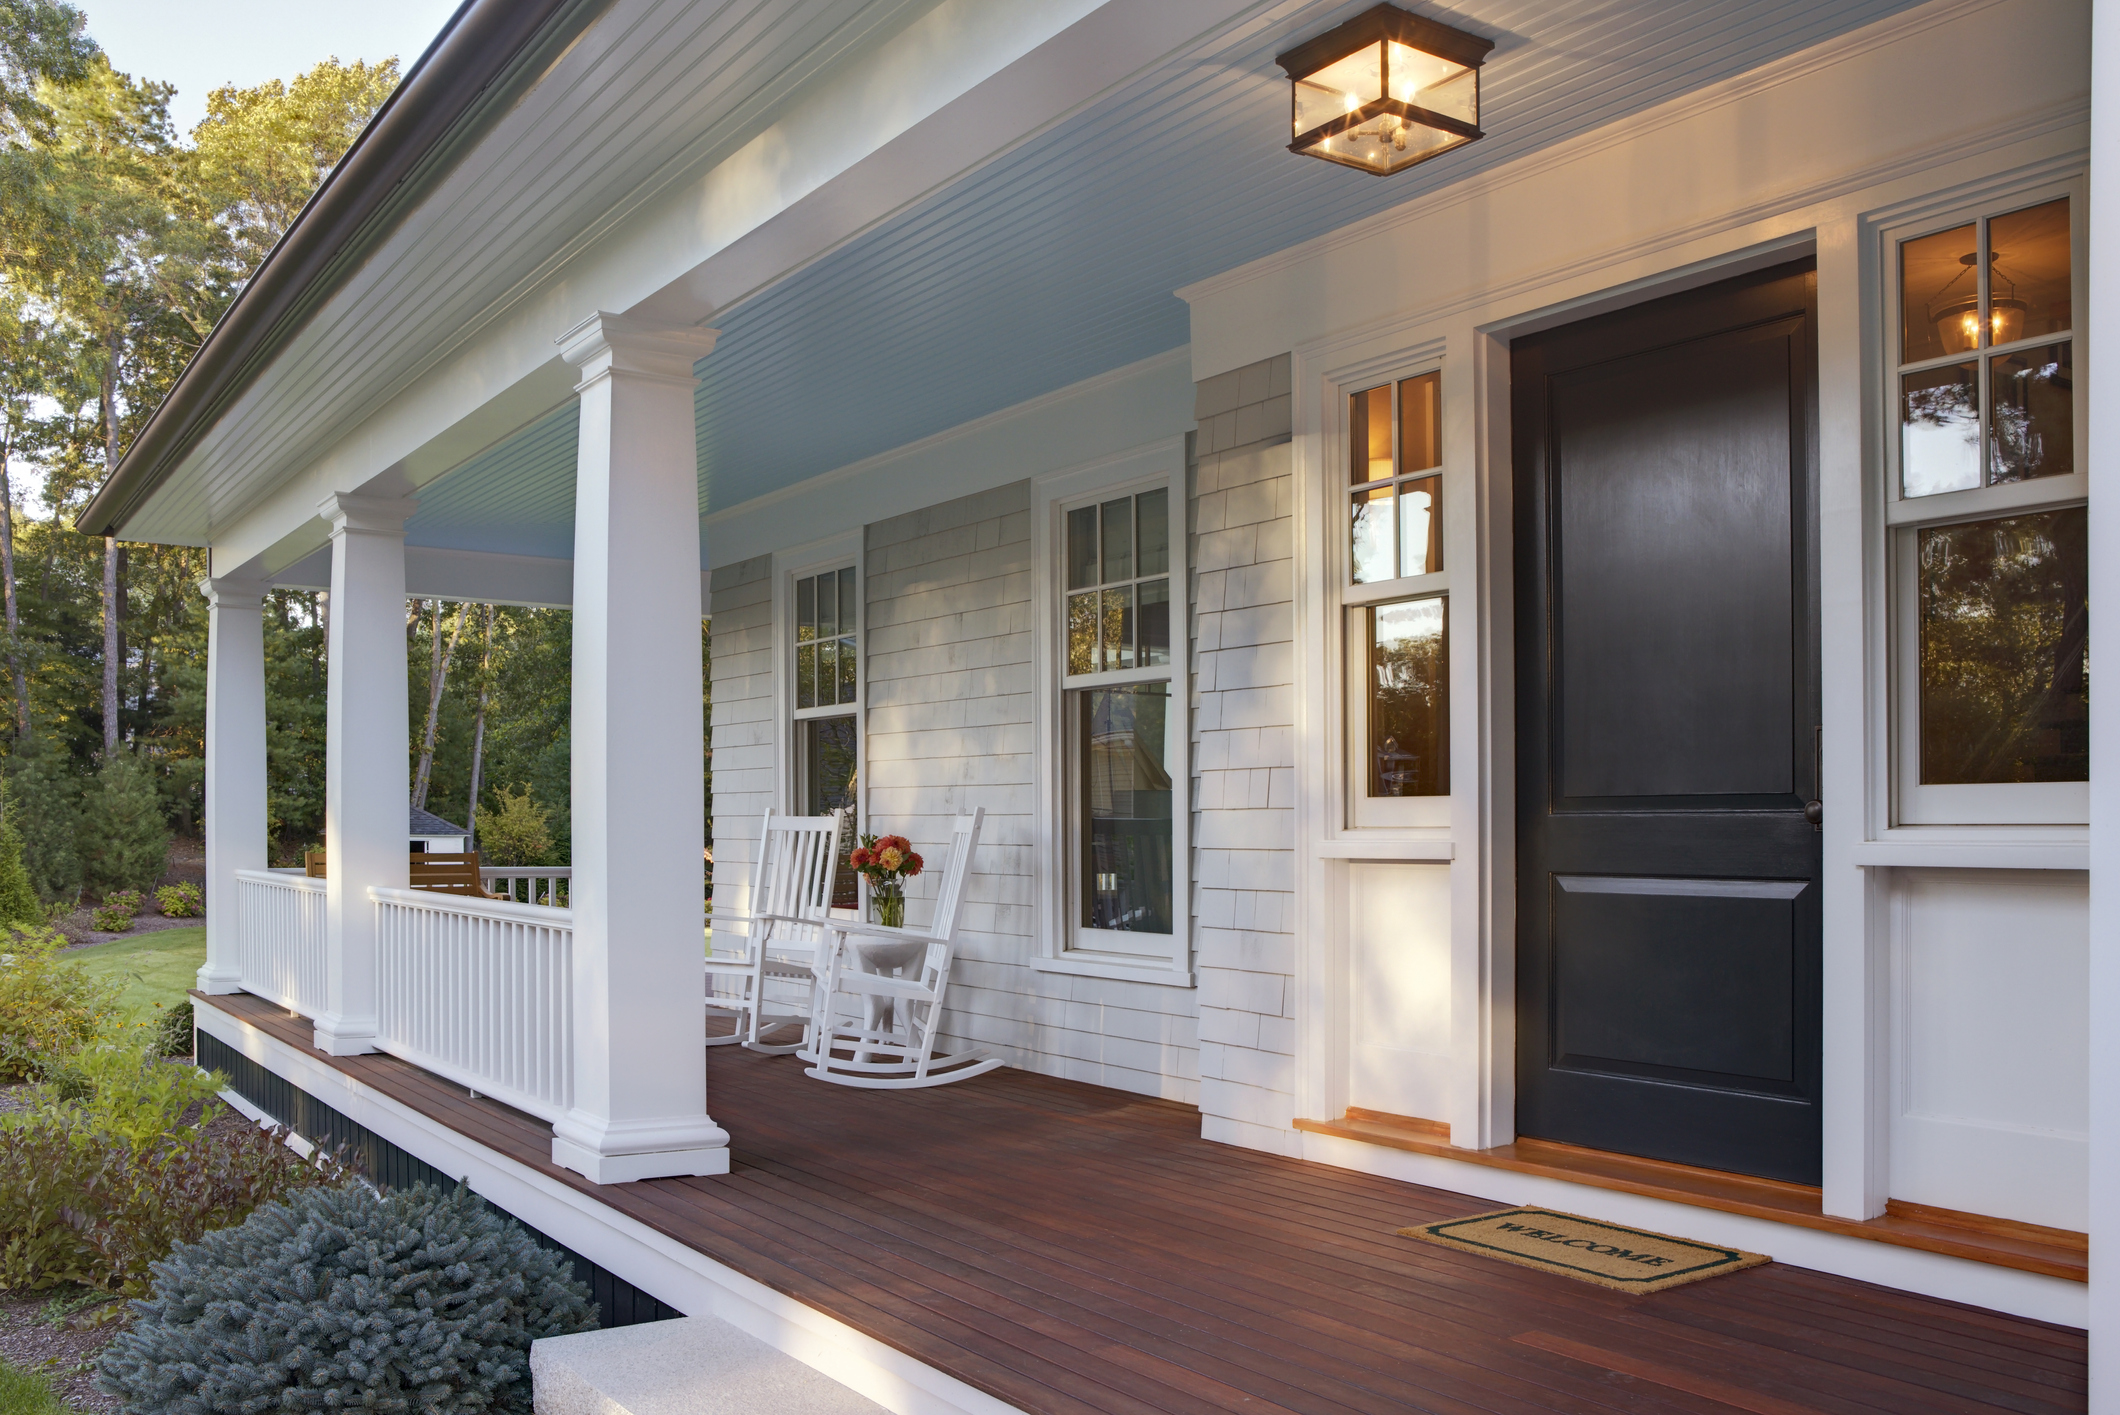 Porch paint ideas: 10 colors and designs to boost curb appeal |